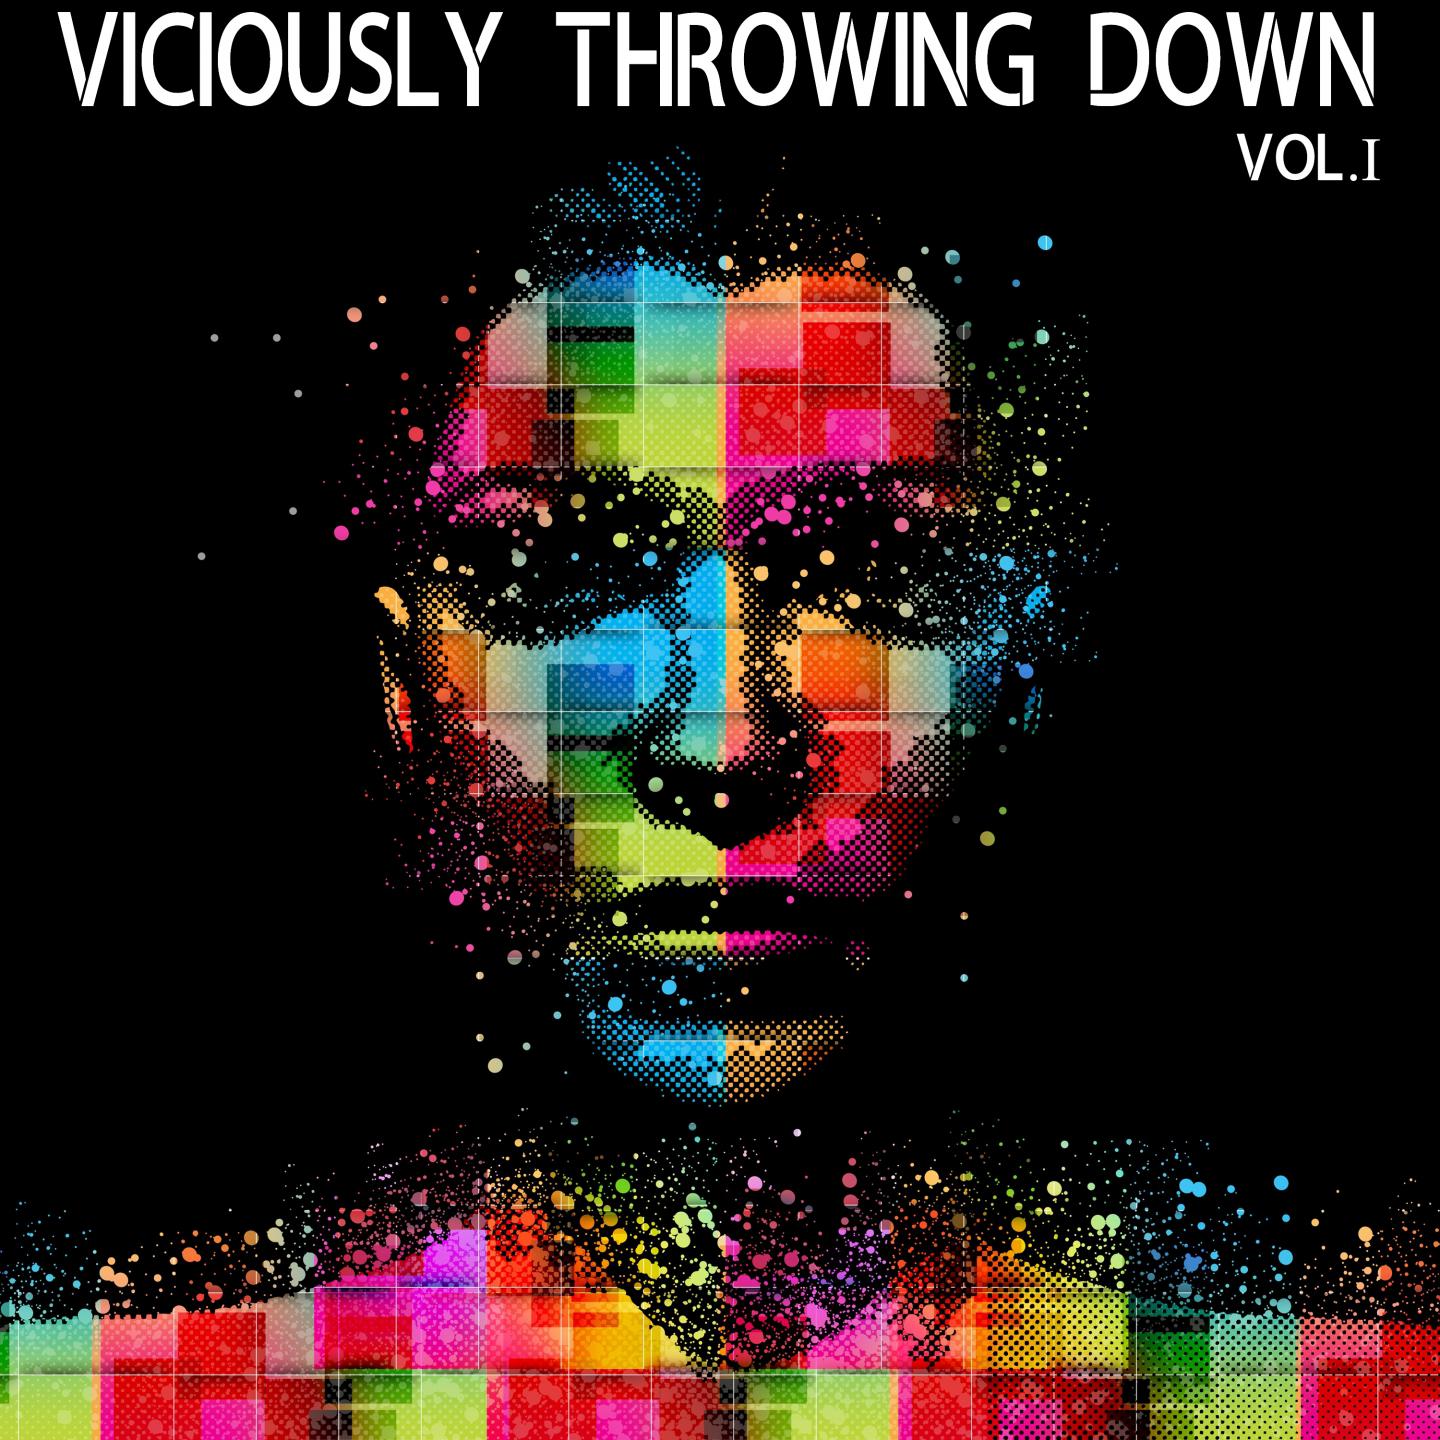 Viciously Throwing Down, Vol. 1